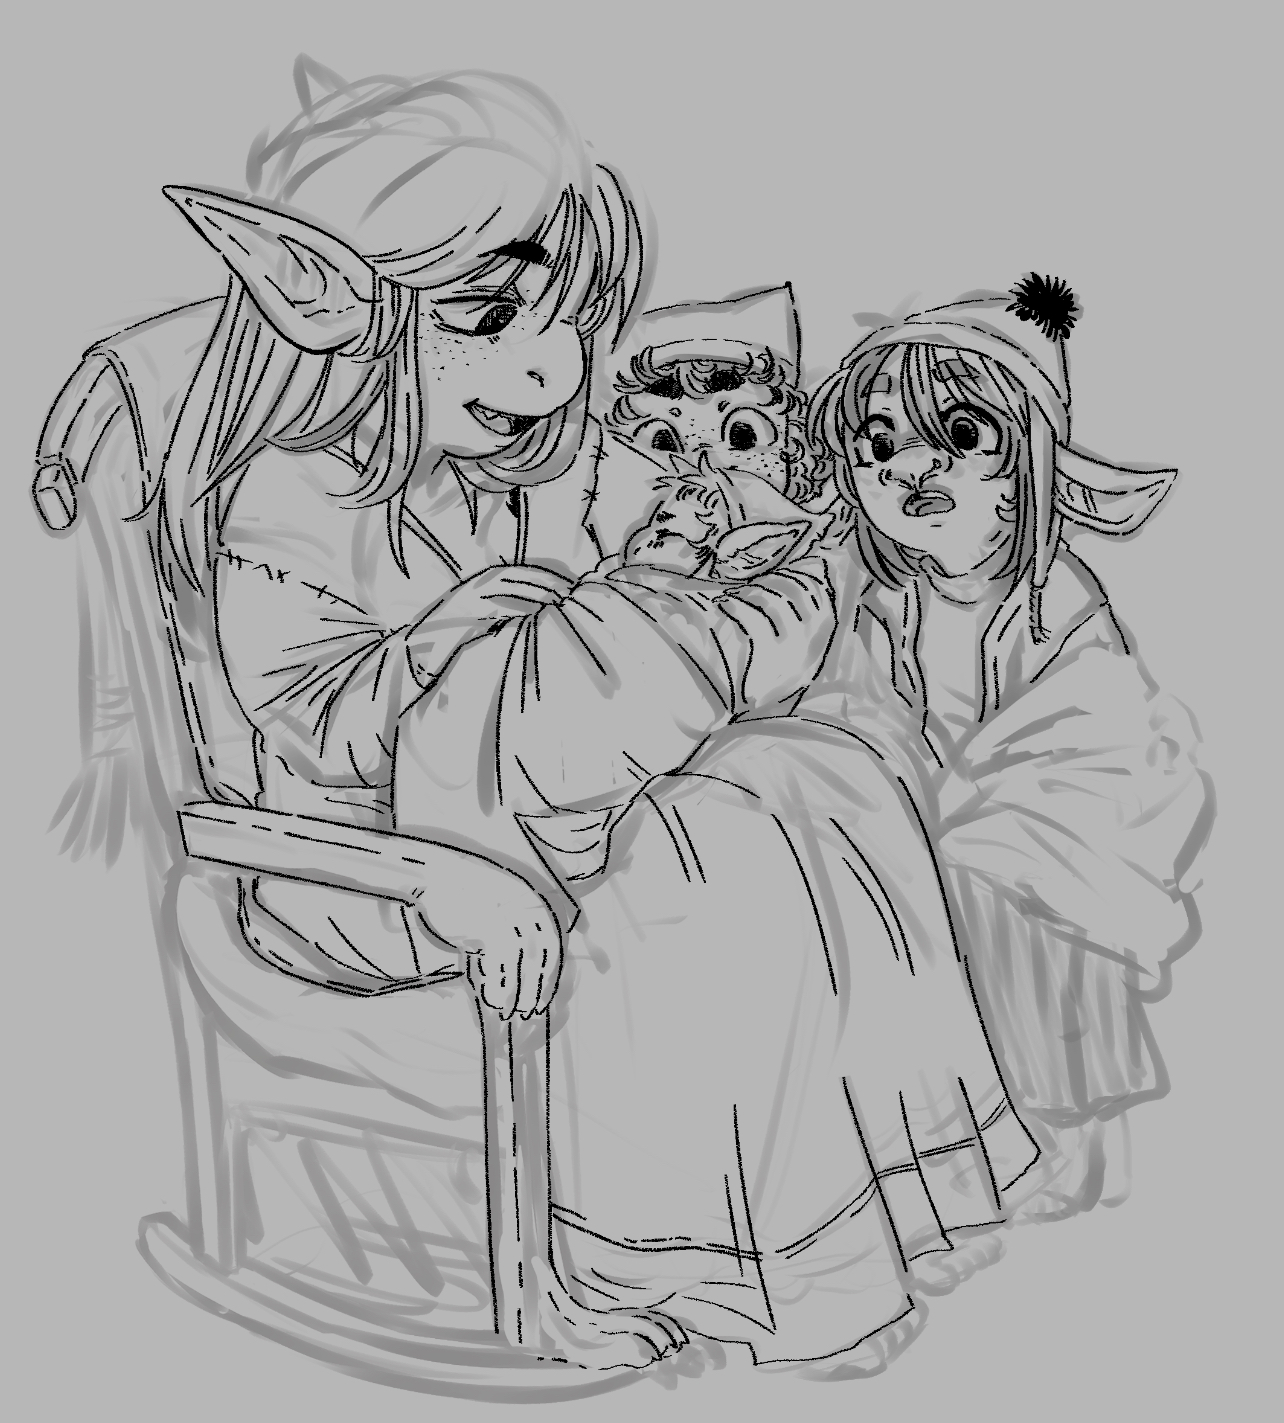 A goblin family welcoming the newest member